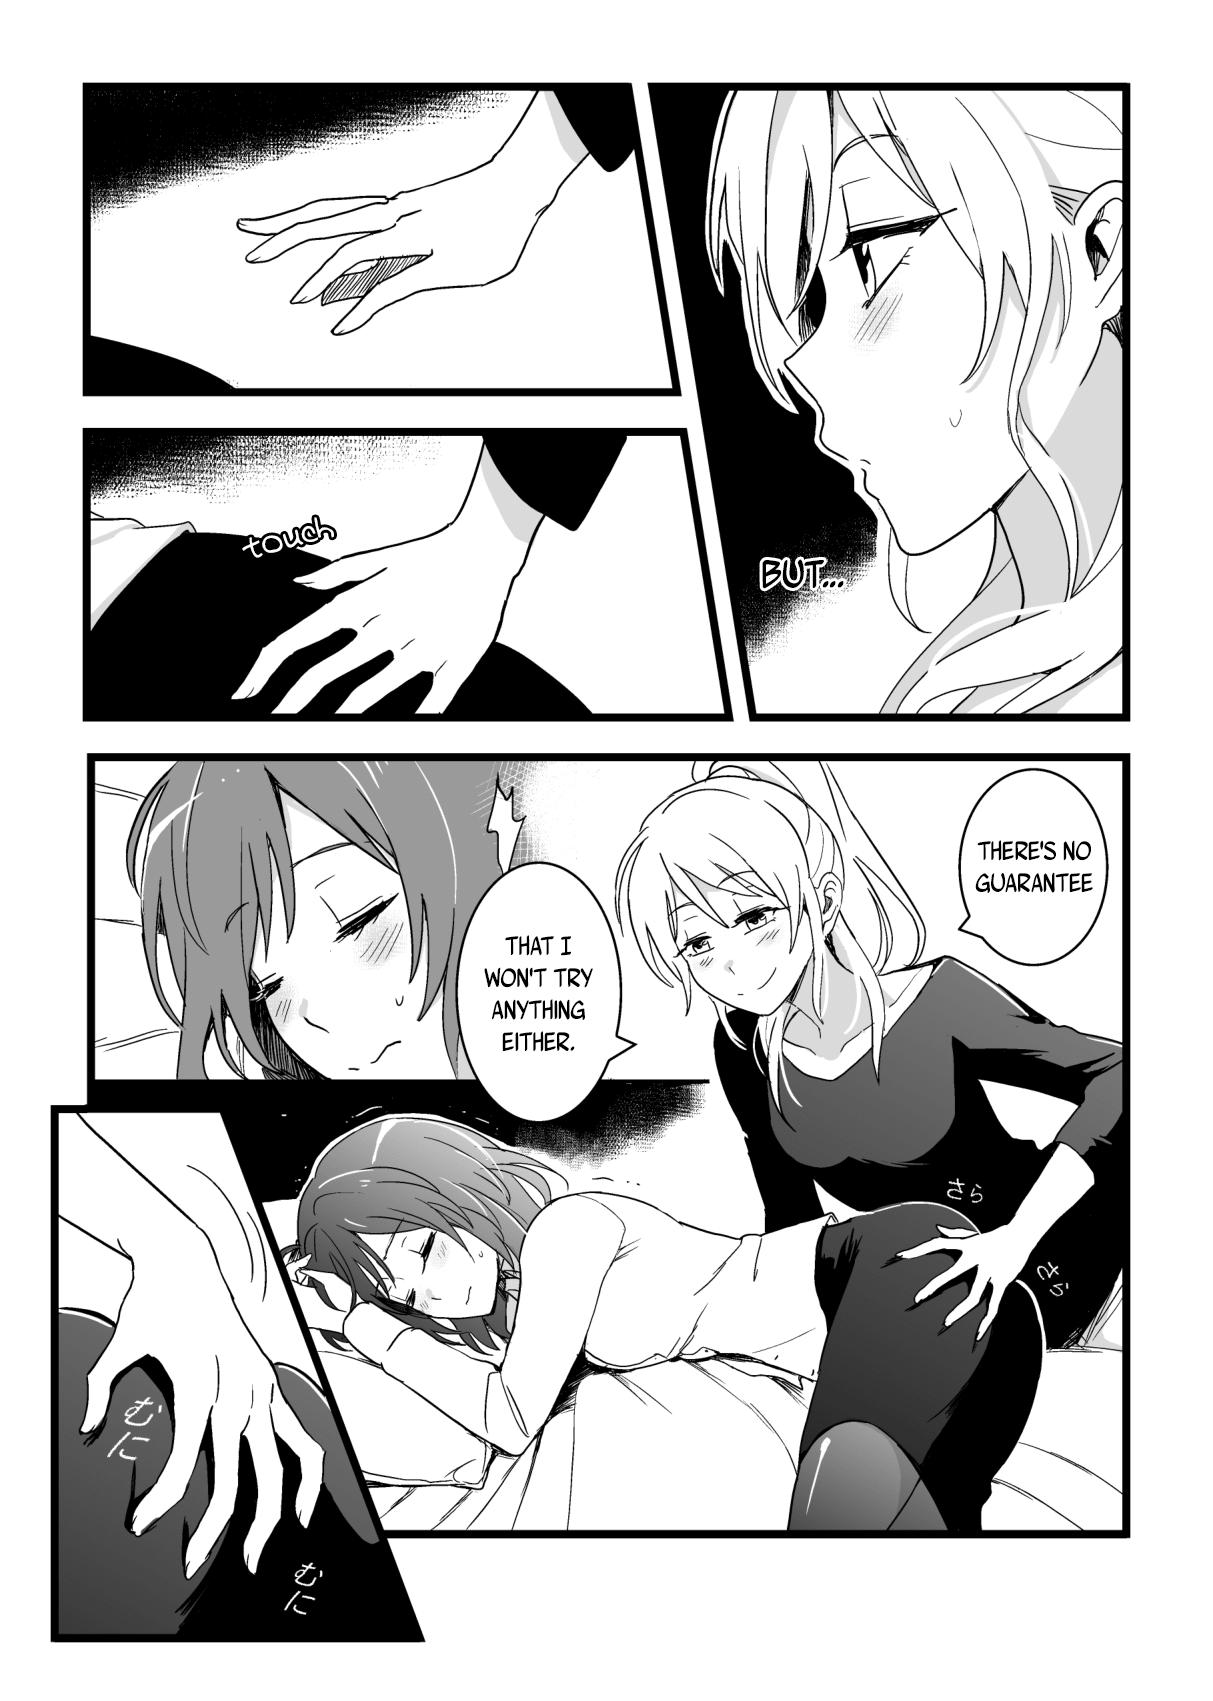 Matures Kaito Carnival Night - Love live Anal Sex - Page 5